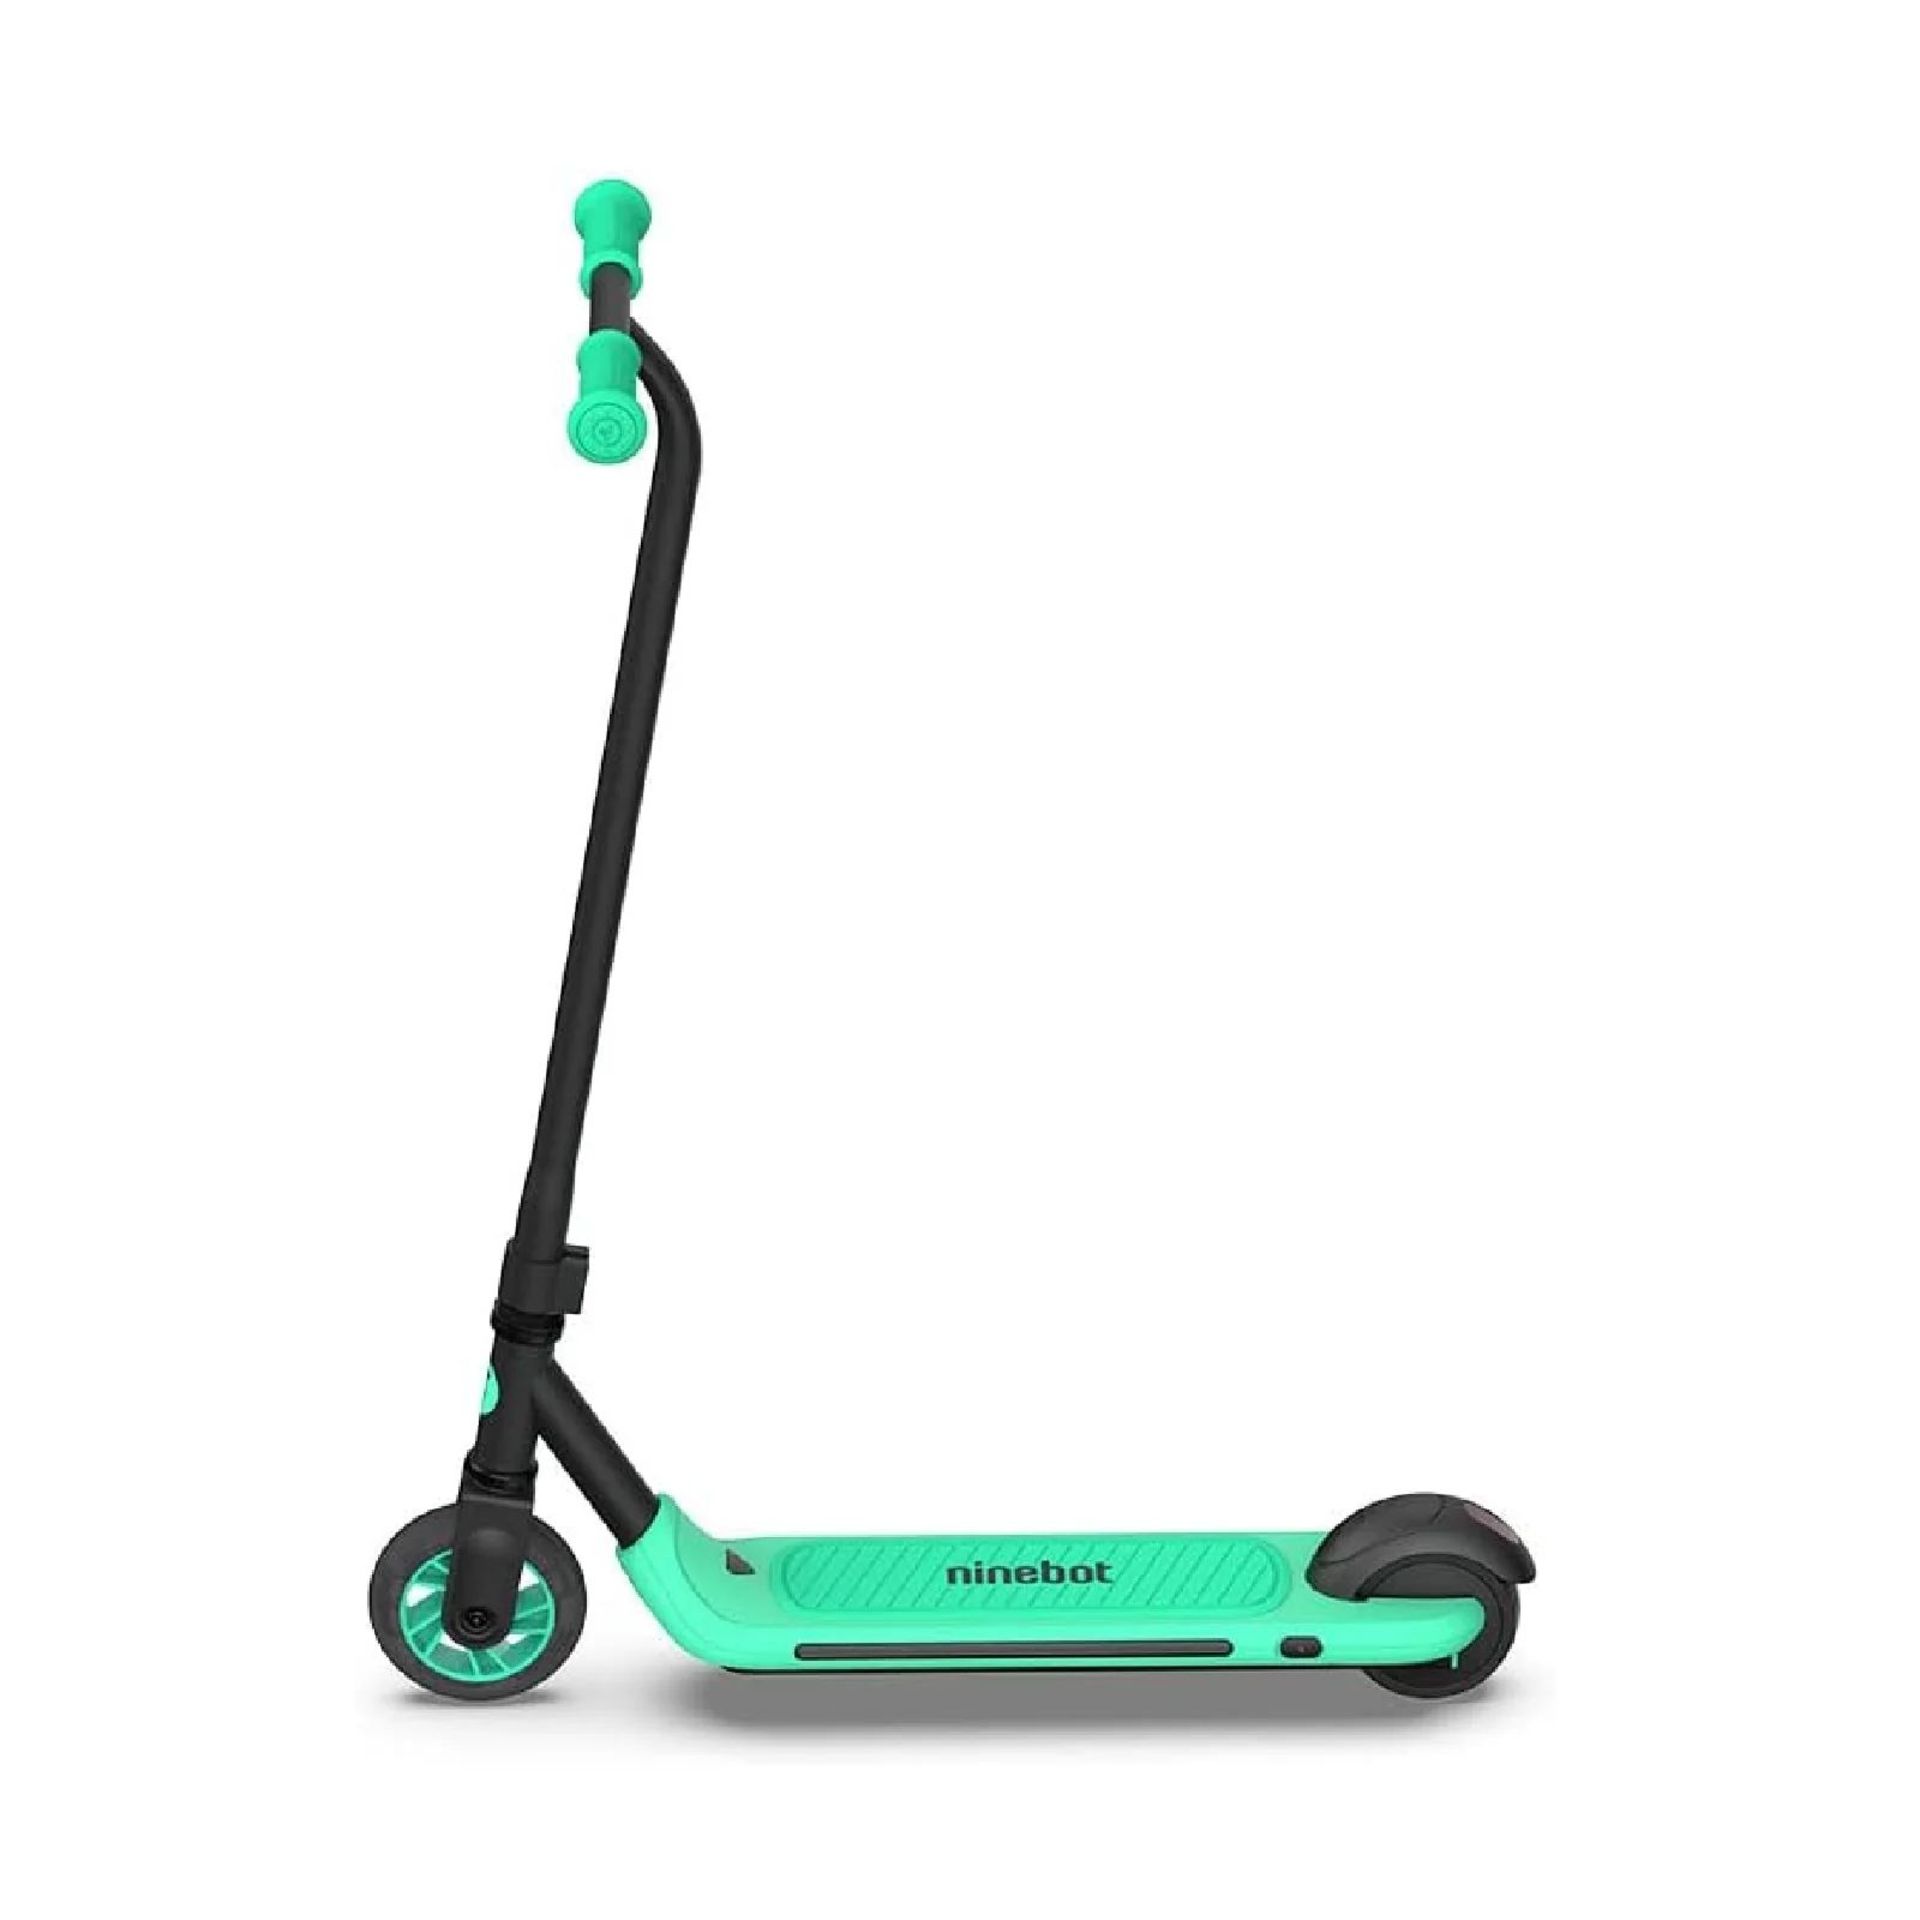 SEGWAY NINEBOT ELECTRIC ASSIST E-KICK SCOOTER (FACTORY RECERTIFIED - 30 DAY WARRANTY INCLUDED) - Bild 2 aus 3